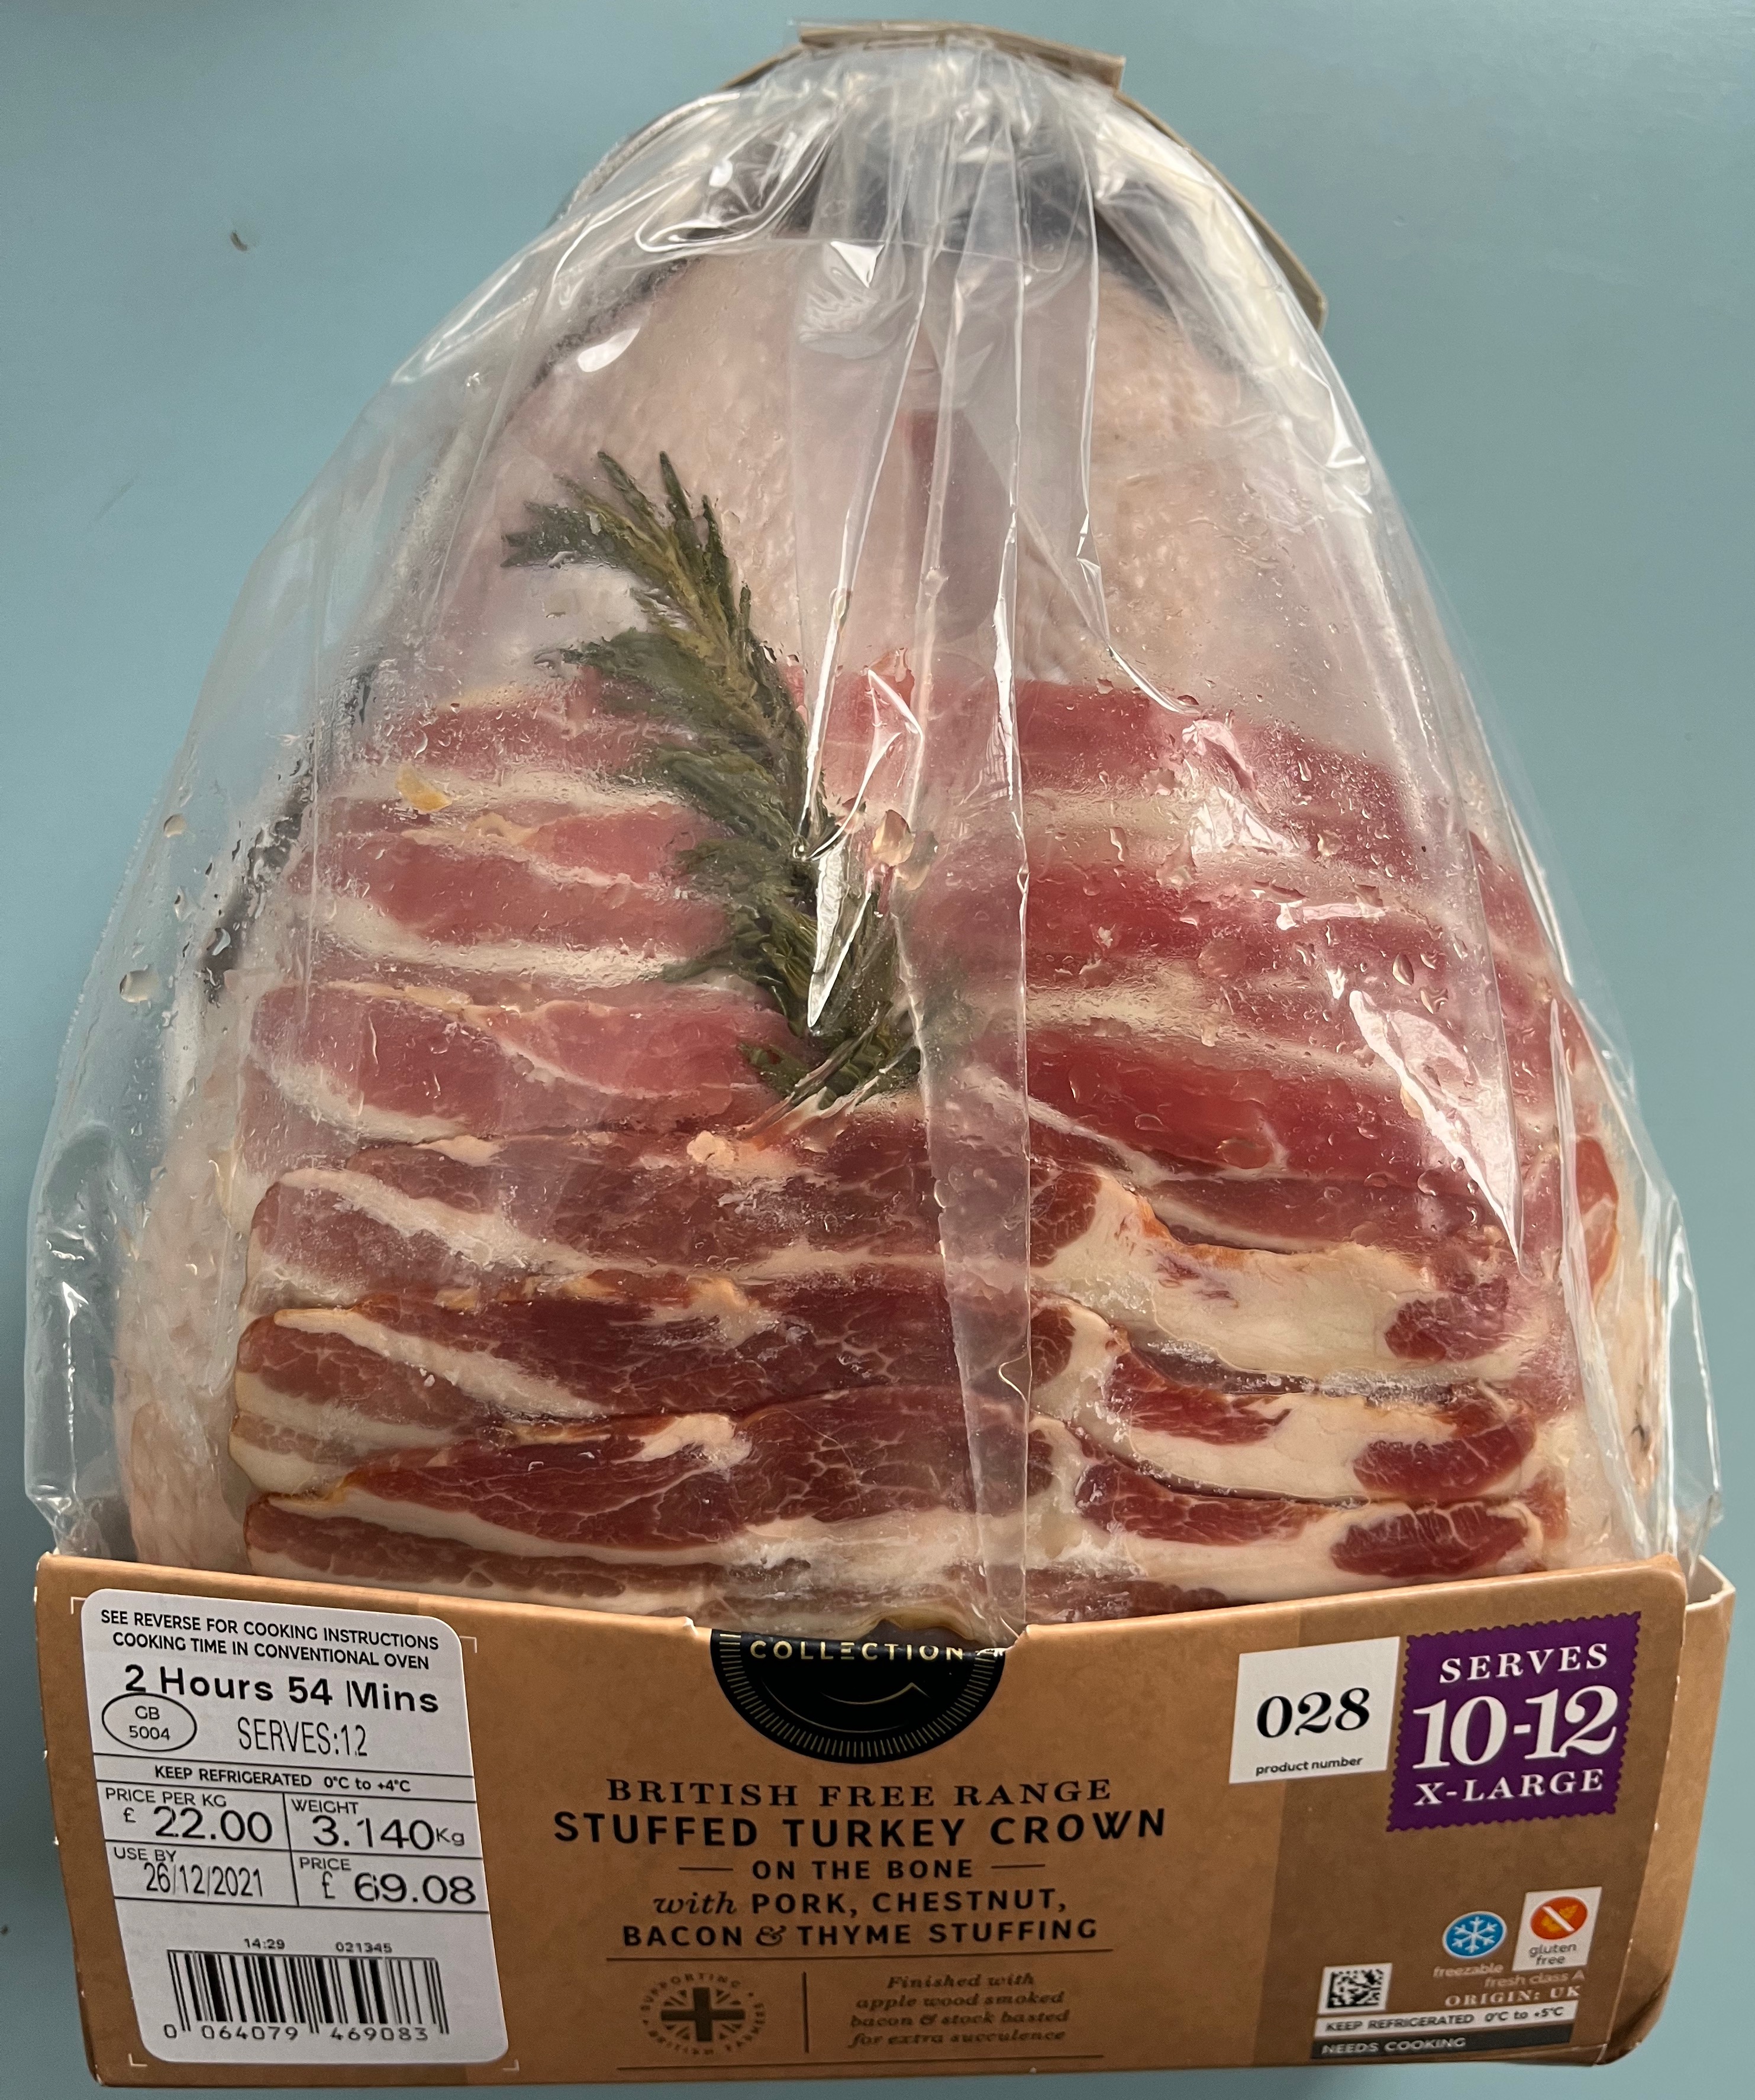 Marks and Spencer British free range stuffed turkey crown on the bone, with pork, chestnut, bacon and thyme stuffing, weighing 3.14 kilograms.